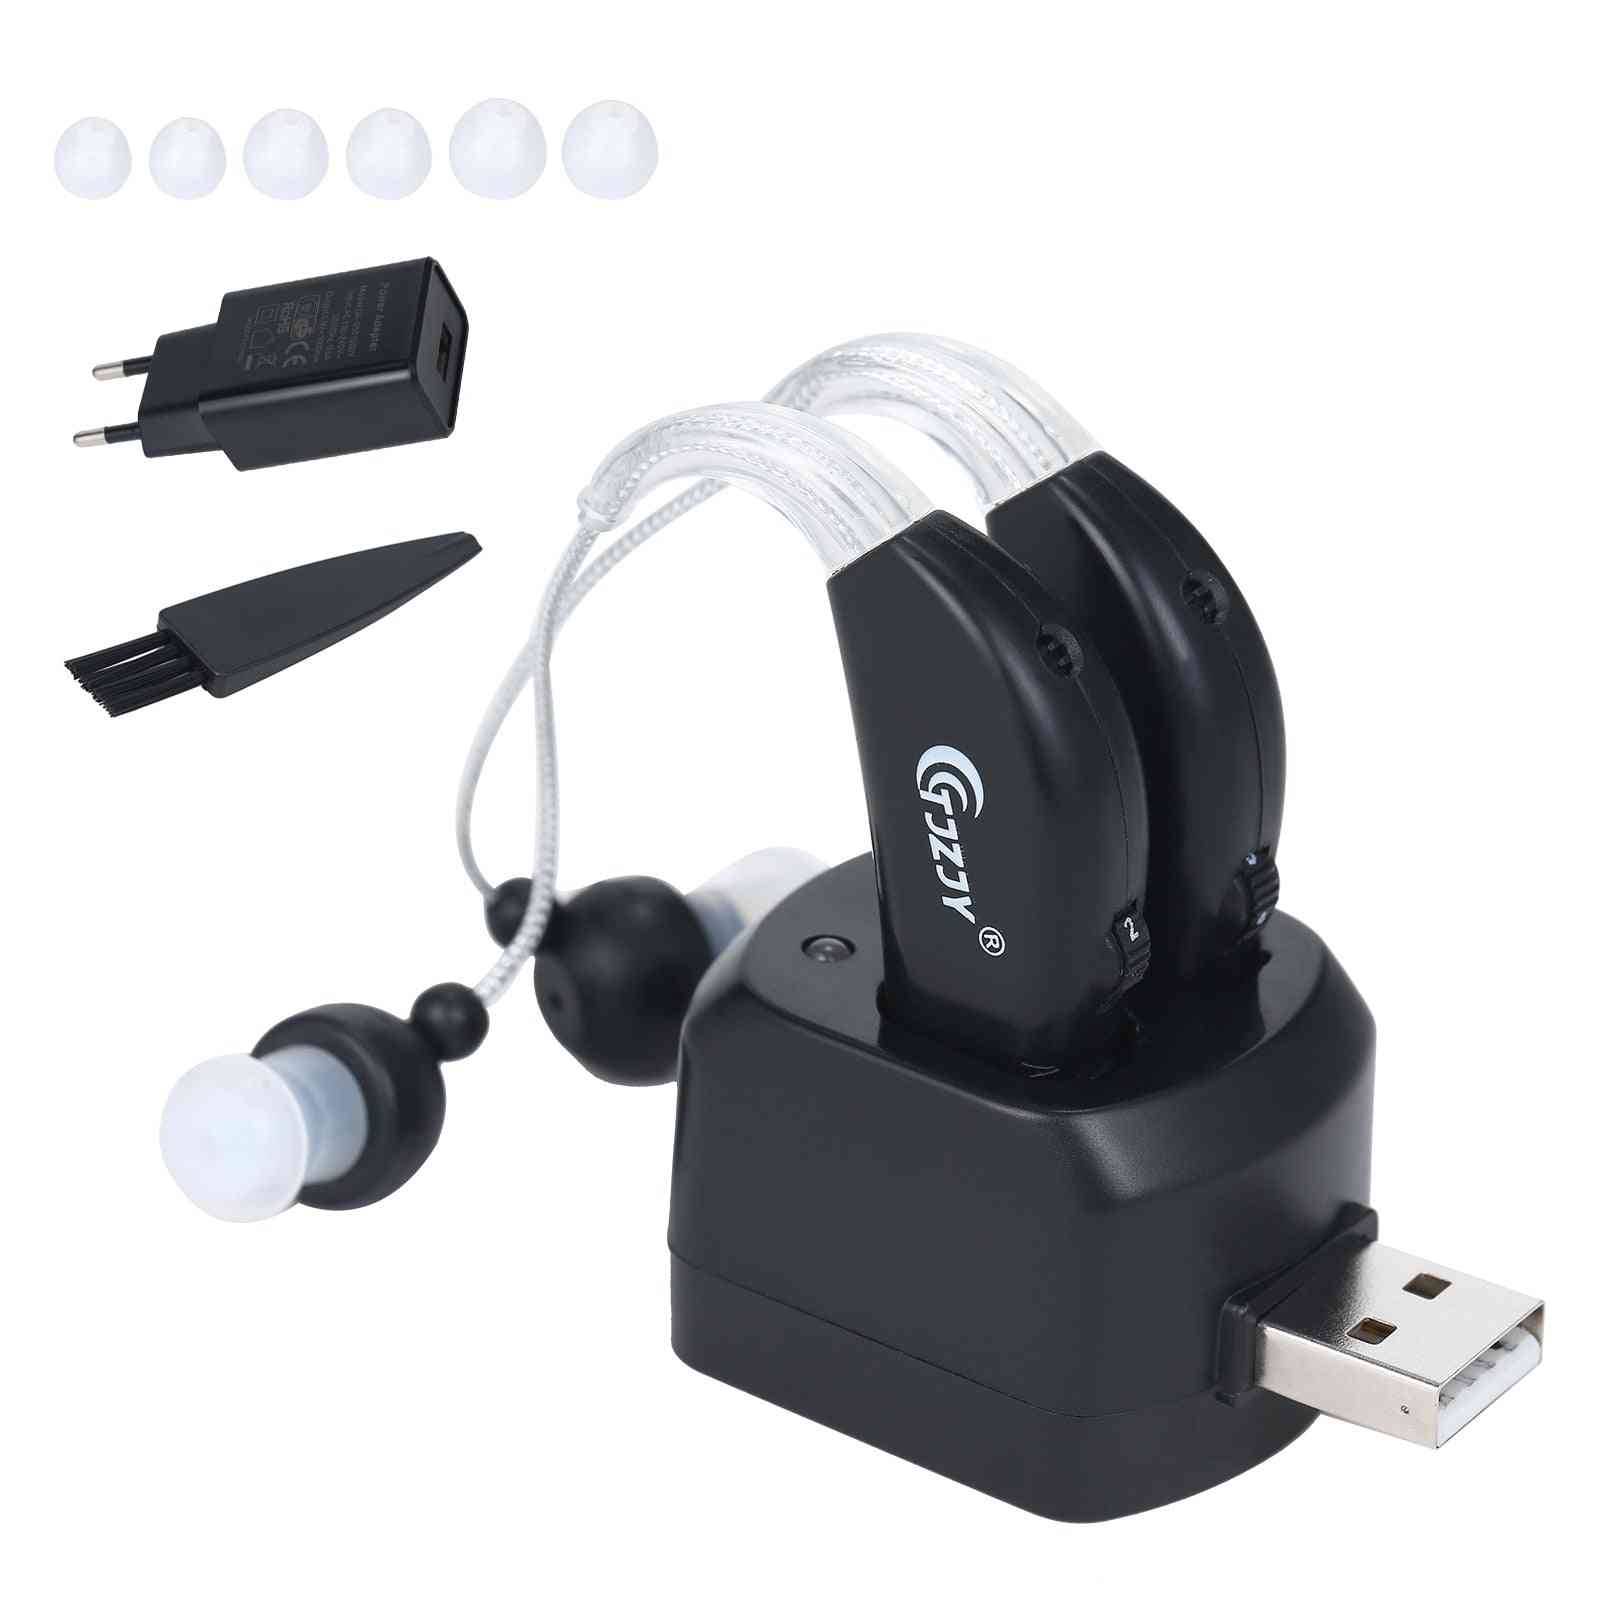 Hearing Aids - Sound Amplifier - Rechargeable For Seniors